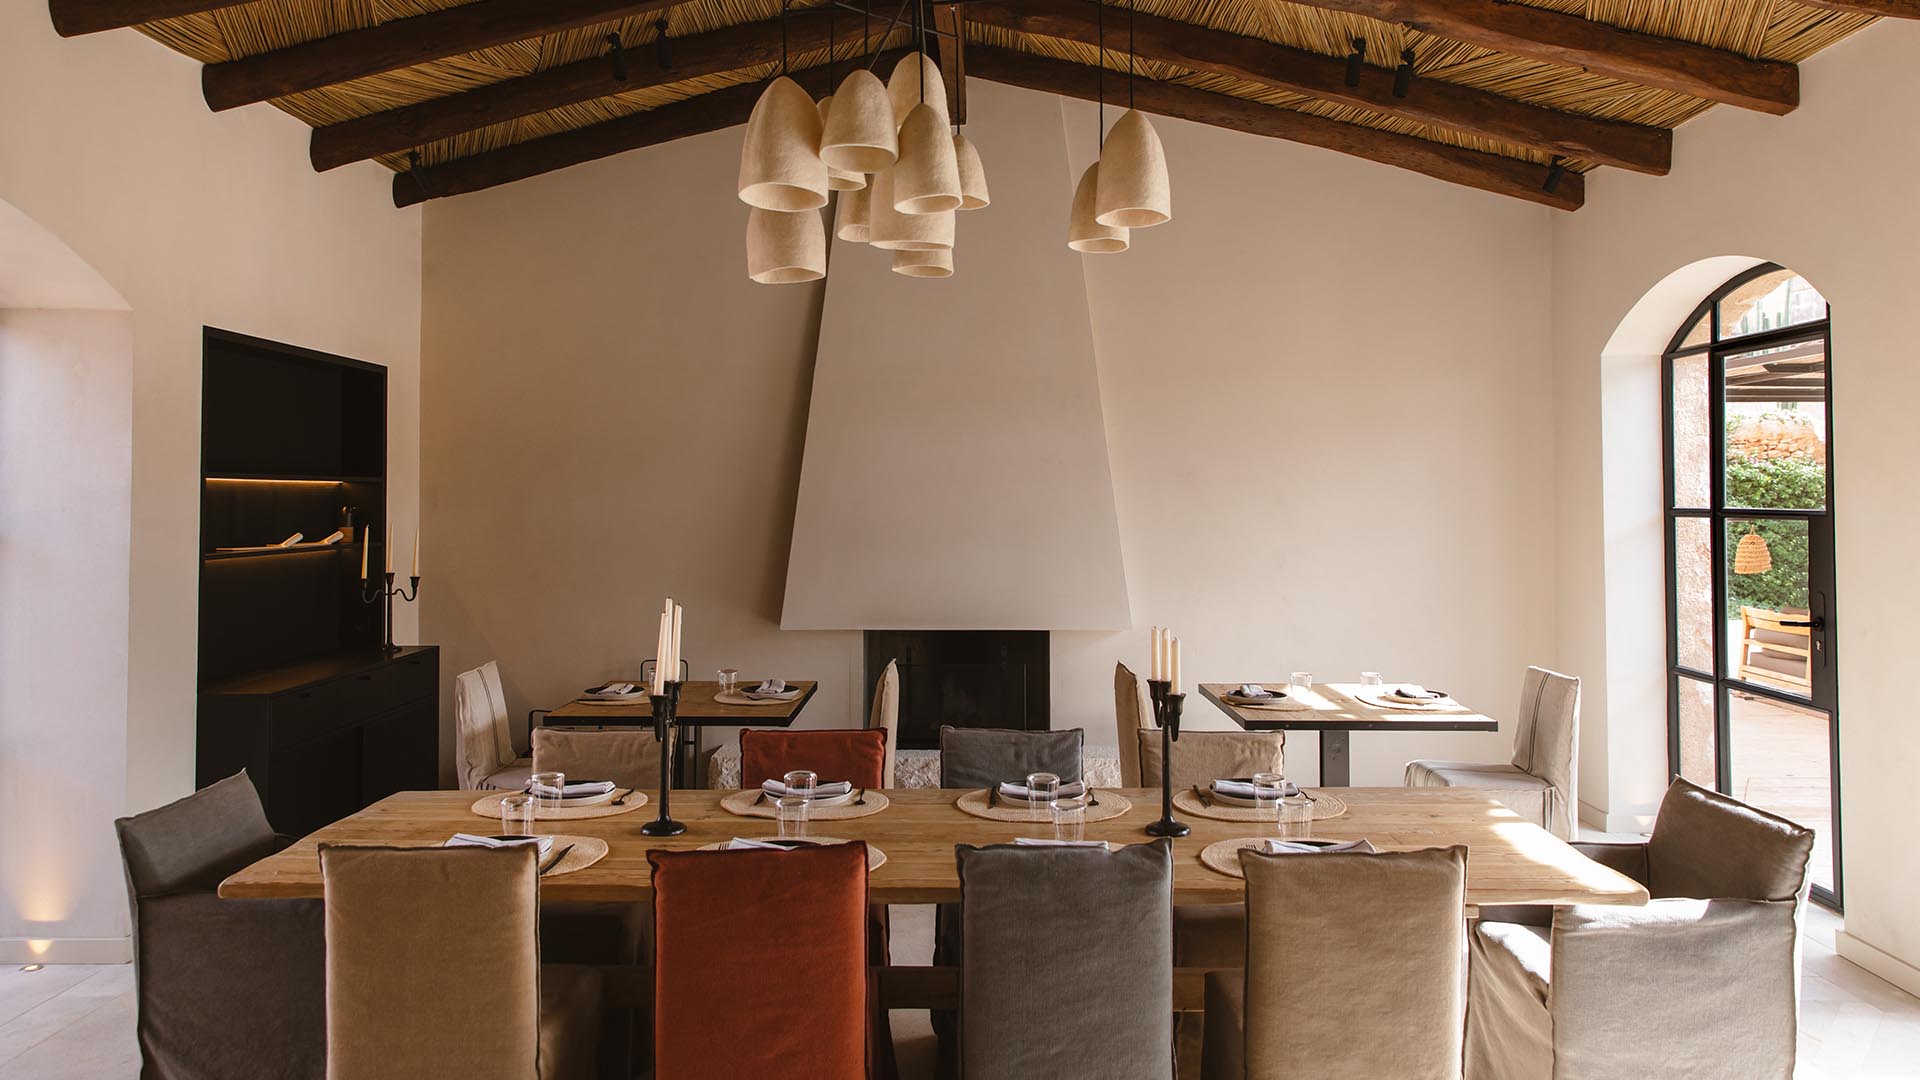 Tablescape inspiration from 10 boutique hotels